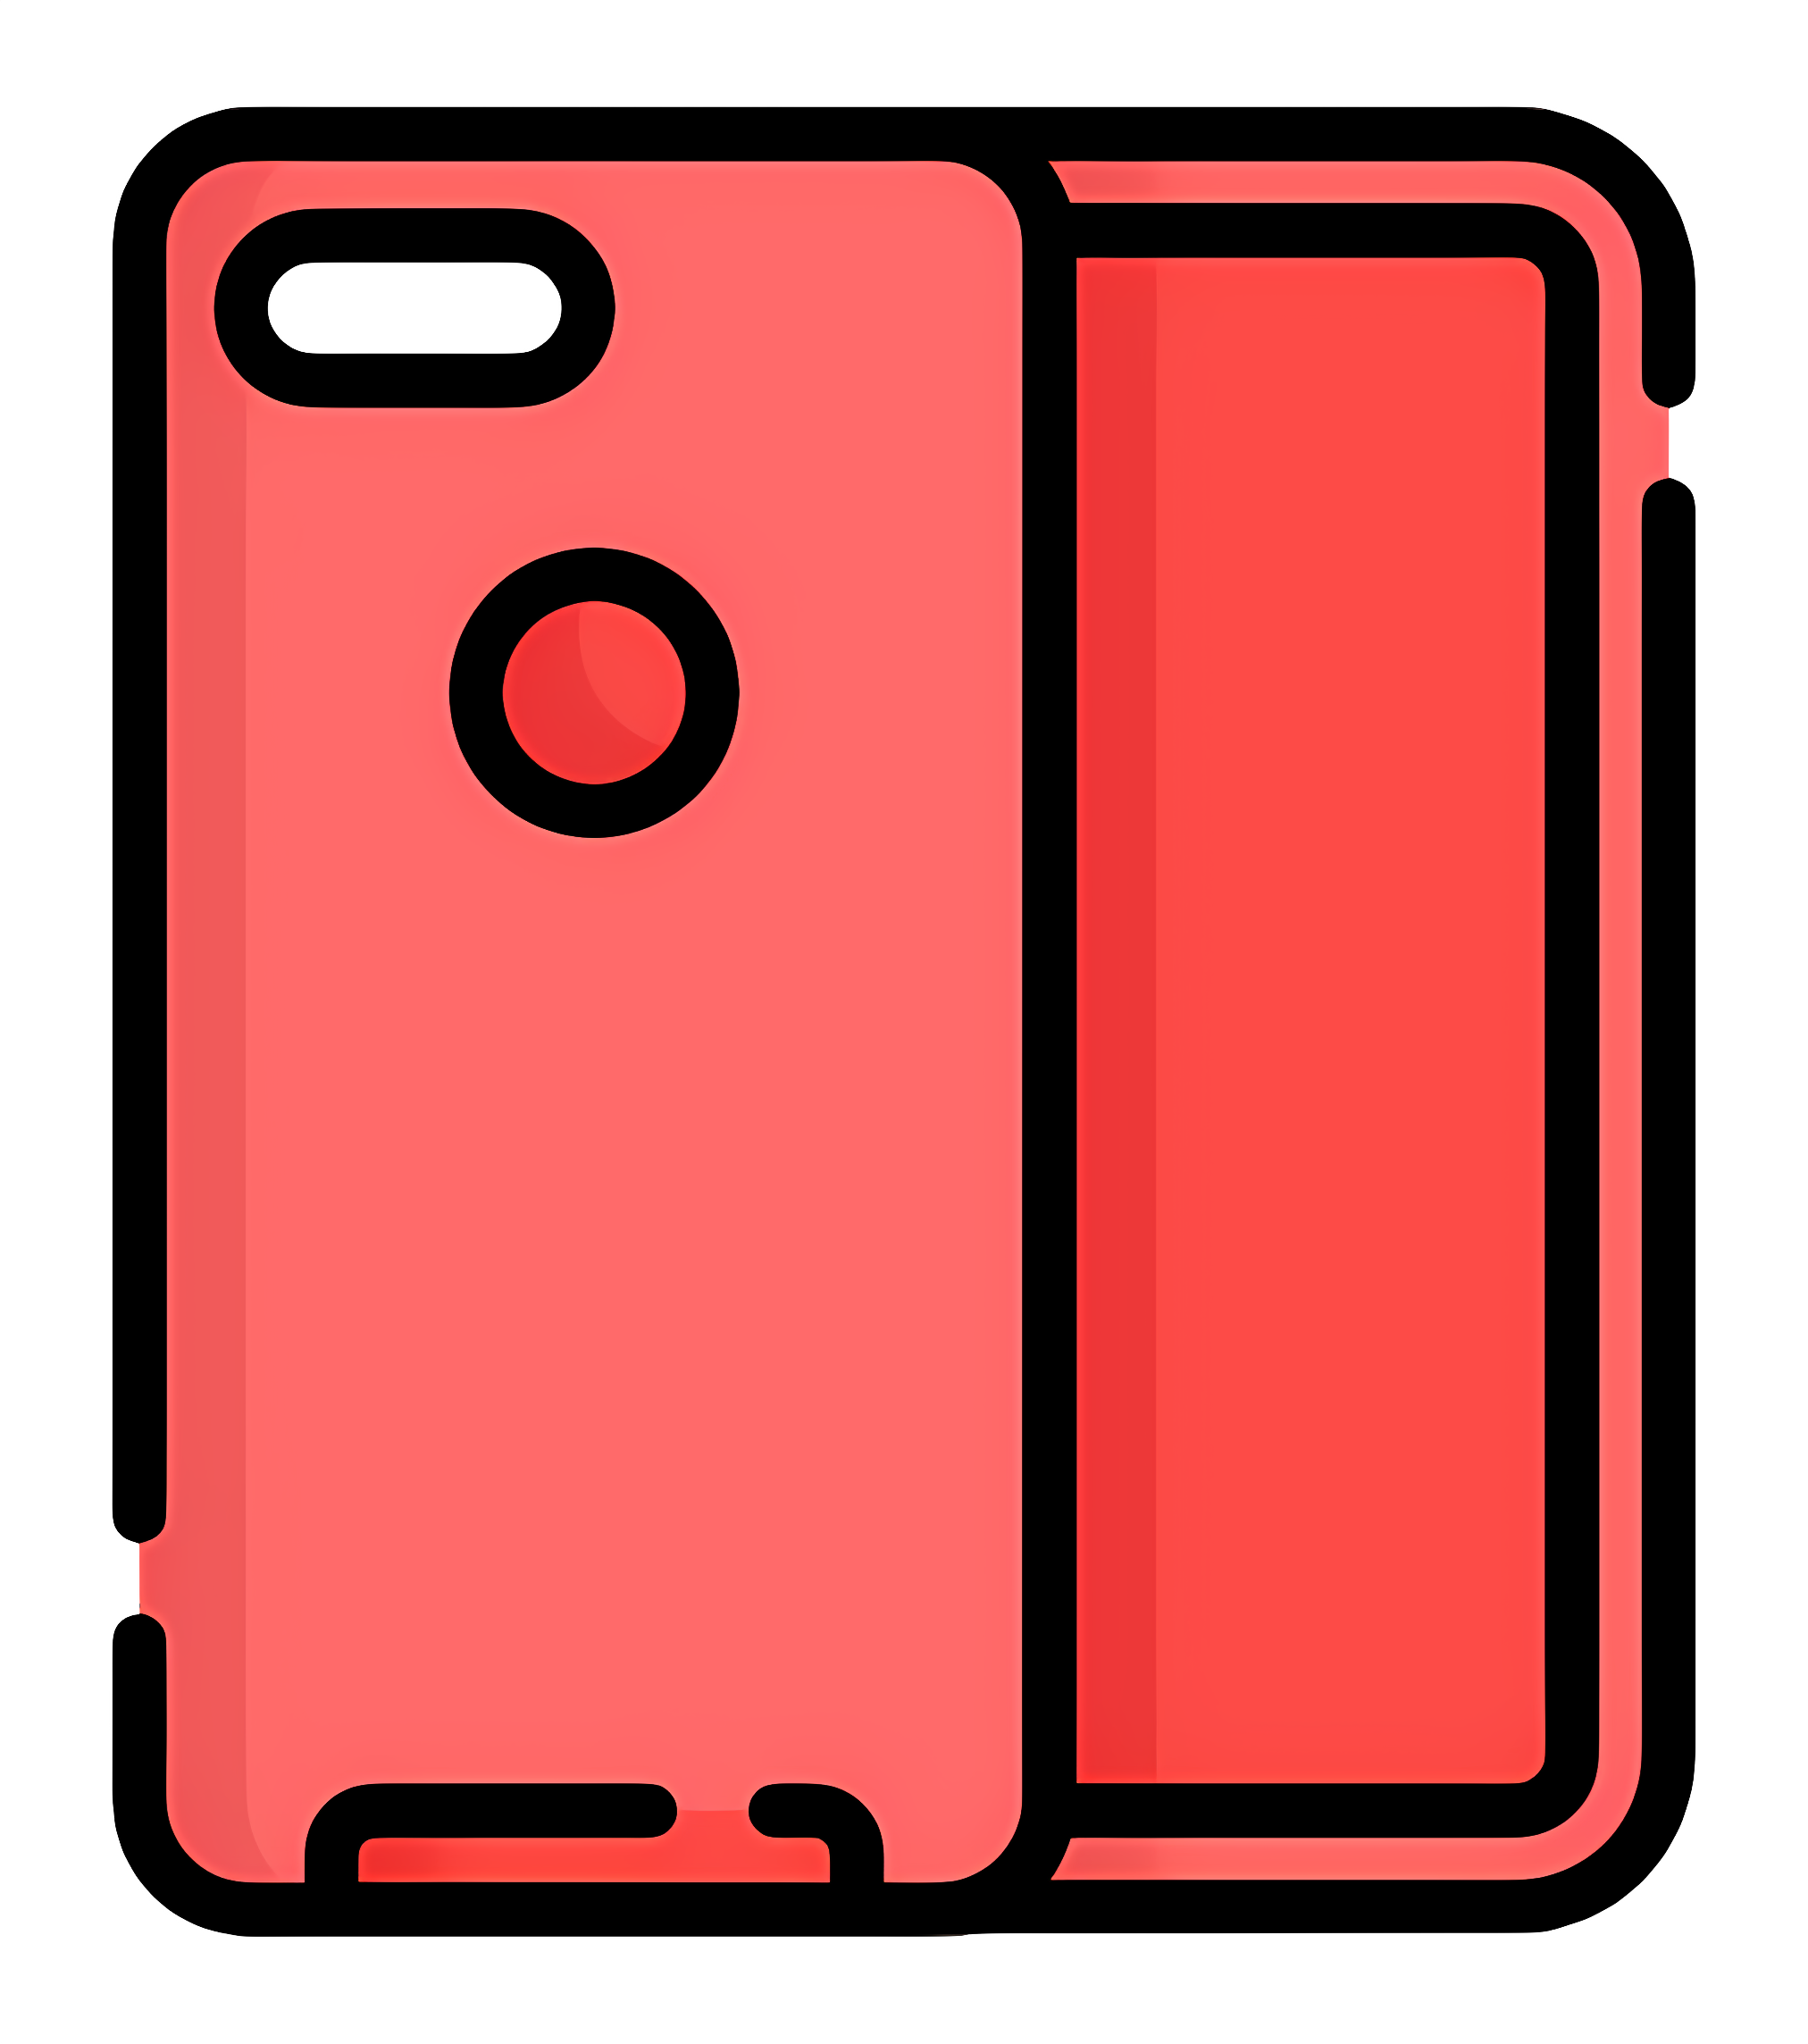 Red iPhone 7 with sleek design, camera Clipart